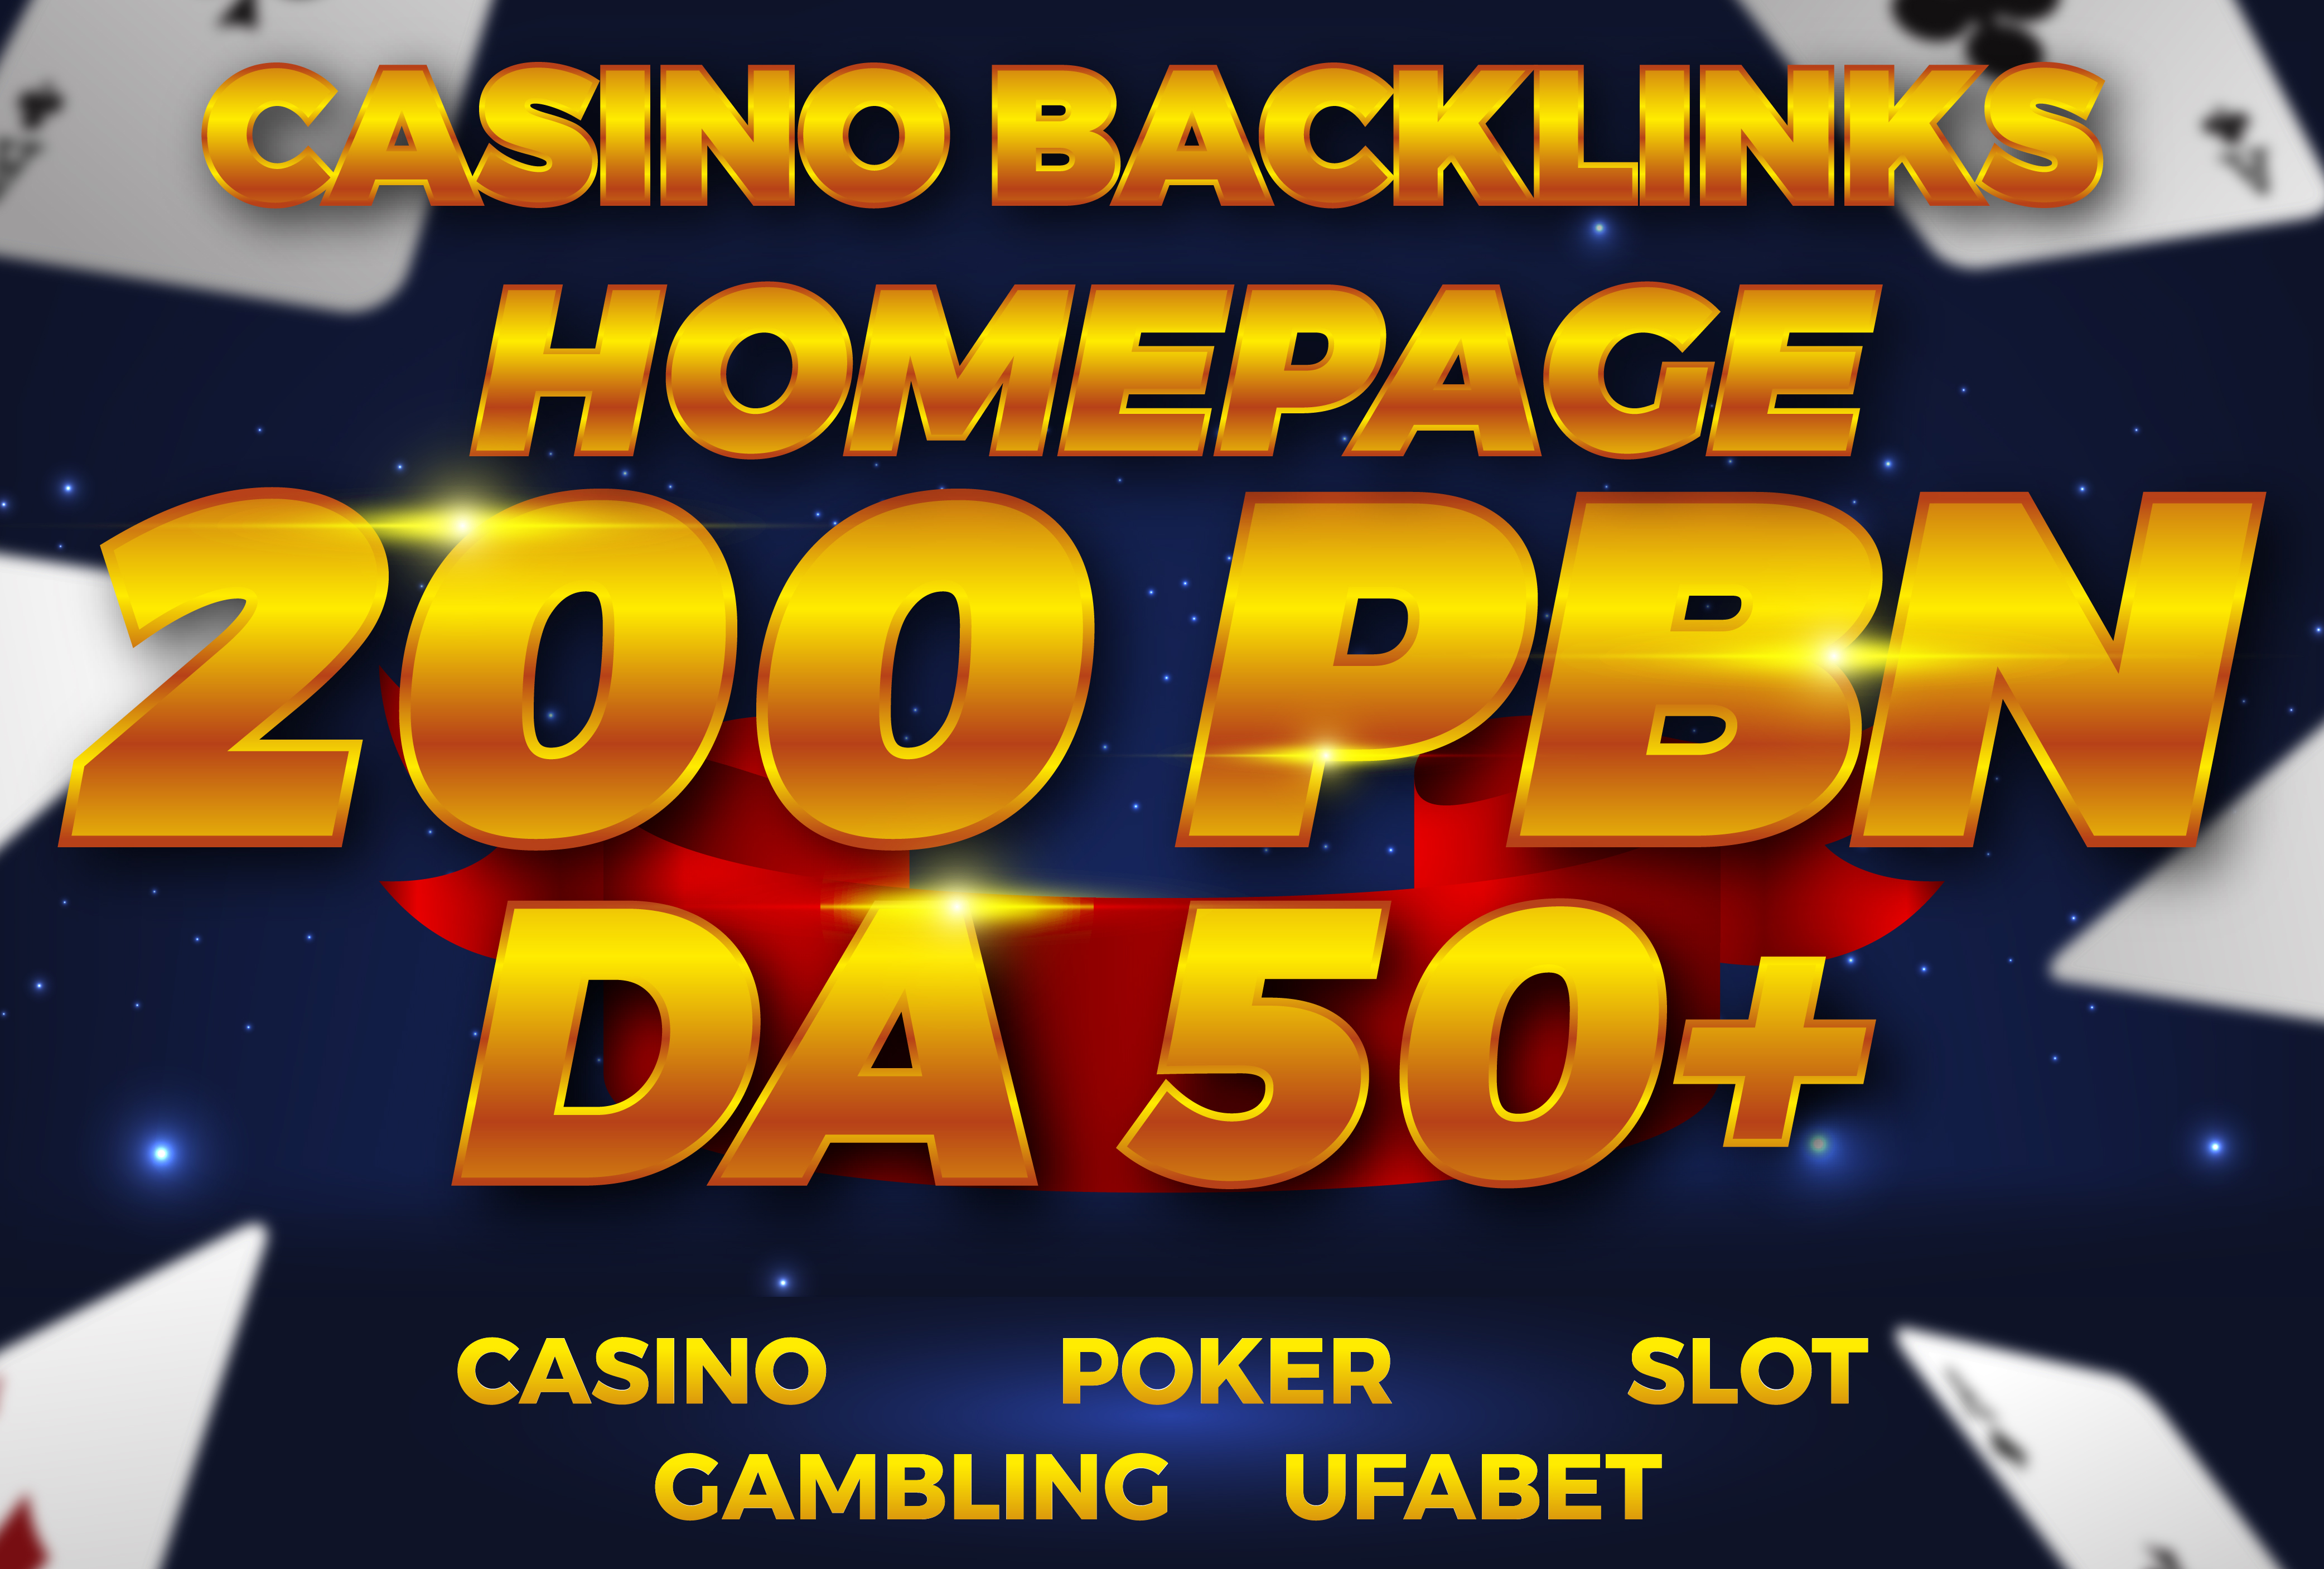 Boost Website with 200 PARMANENT CASINO GAMBLING HOMEPAGE PBN DA 50+